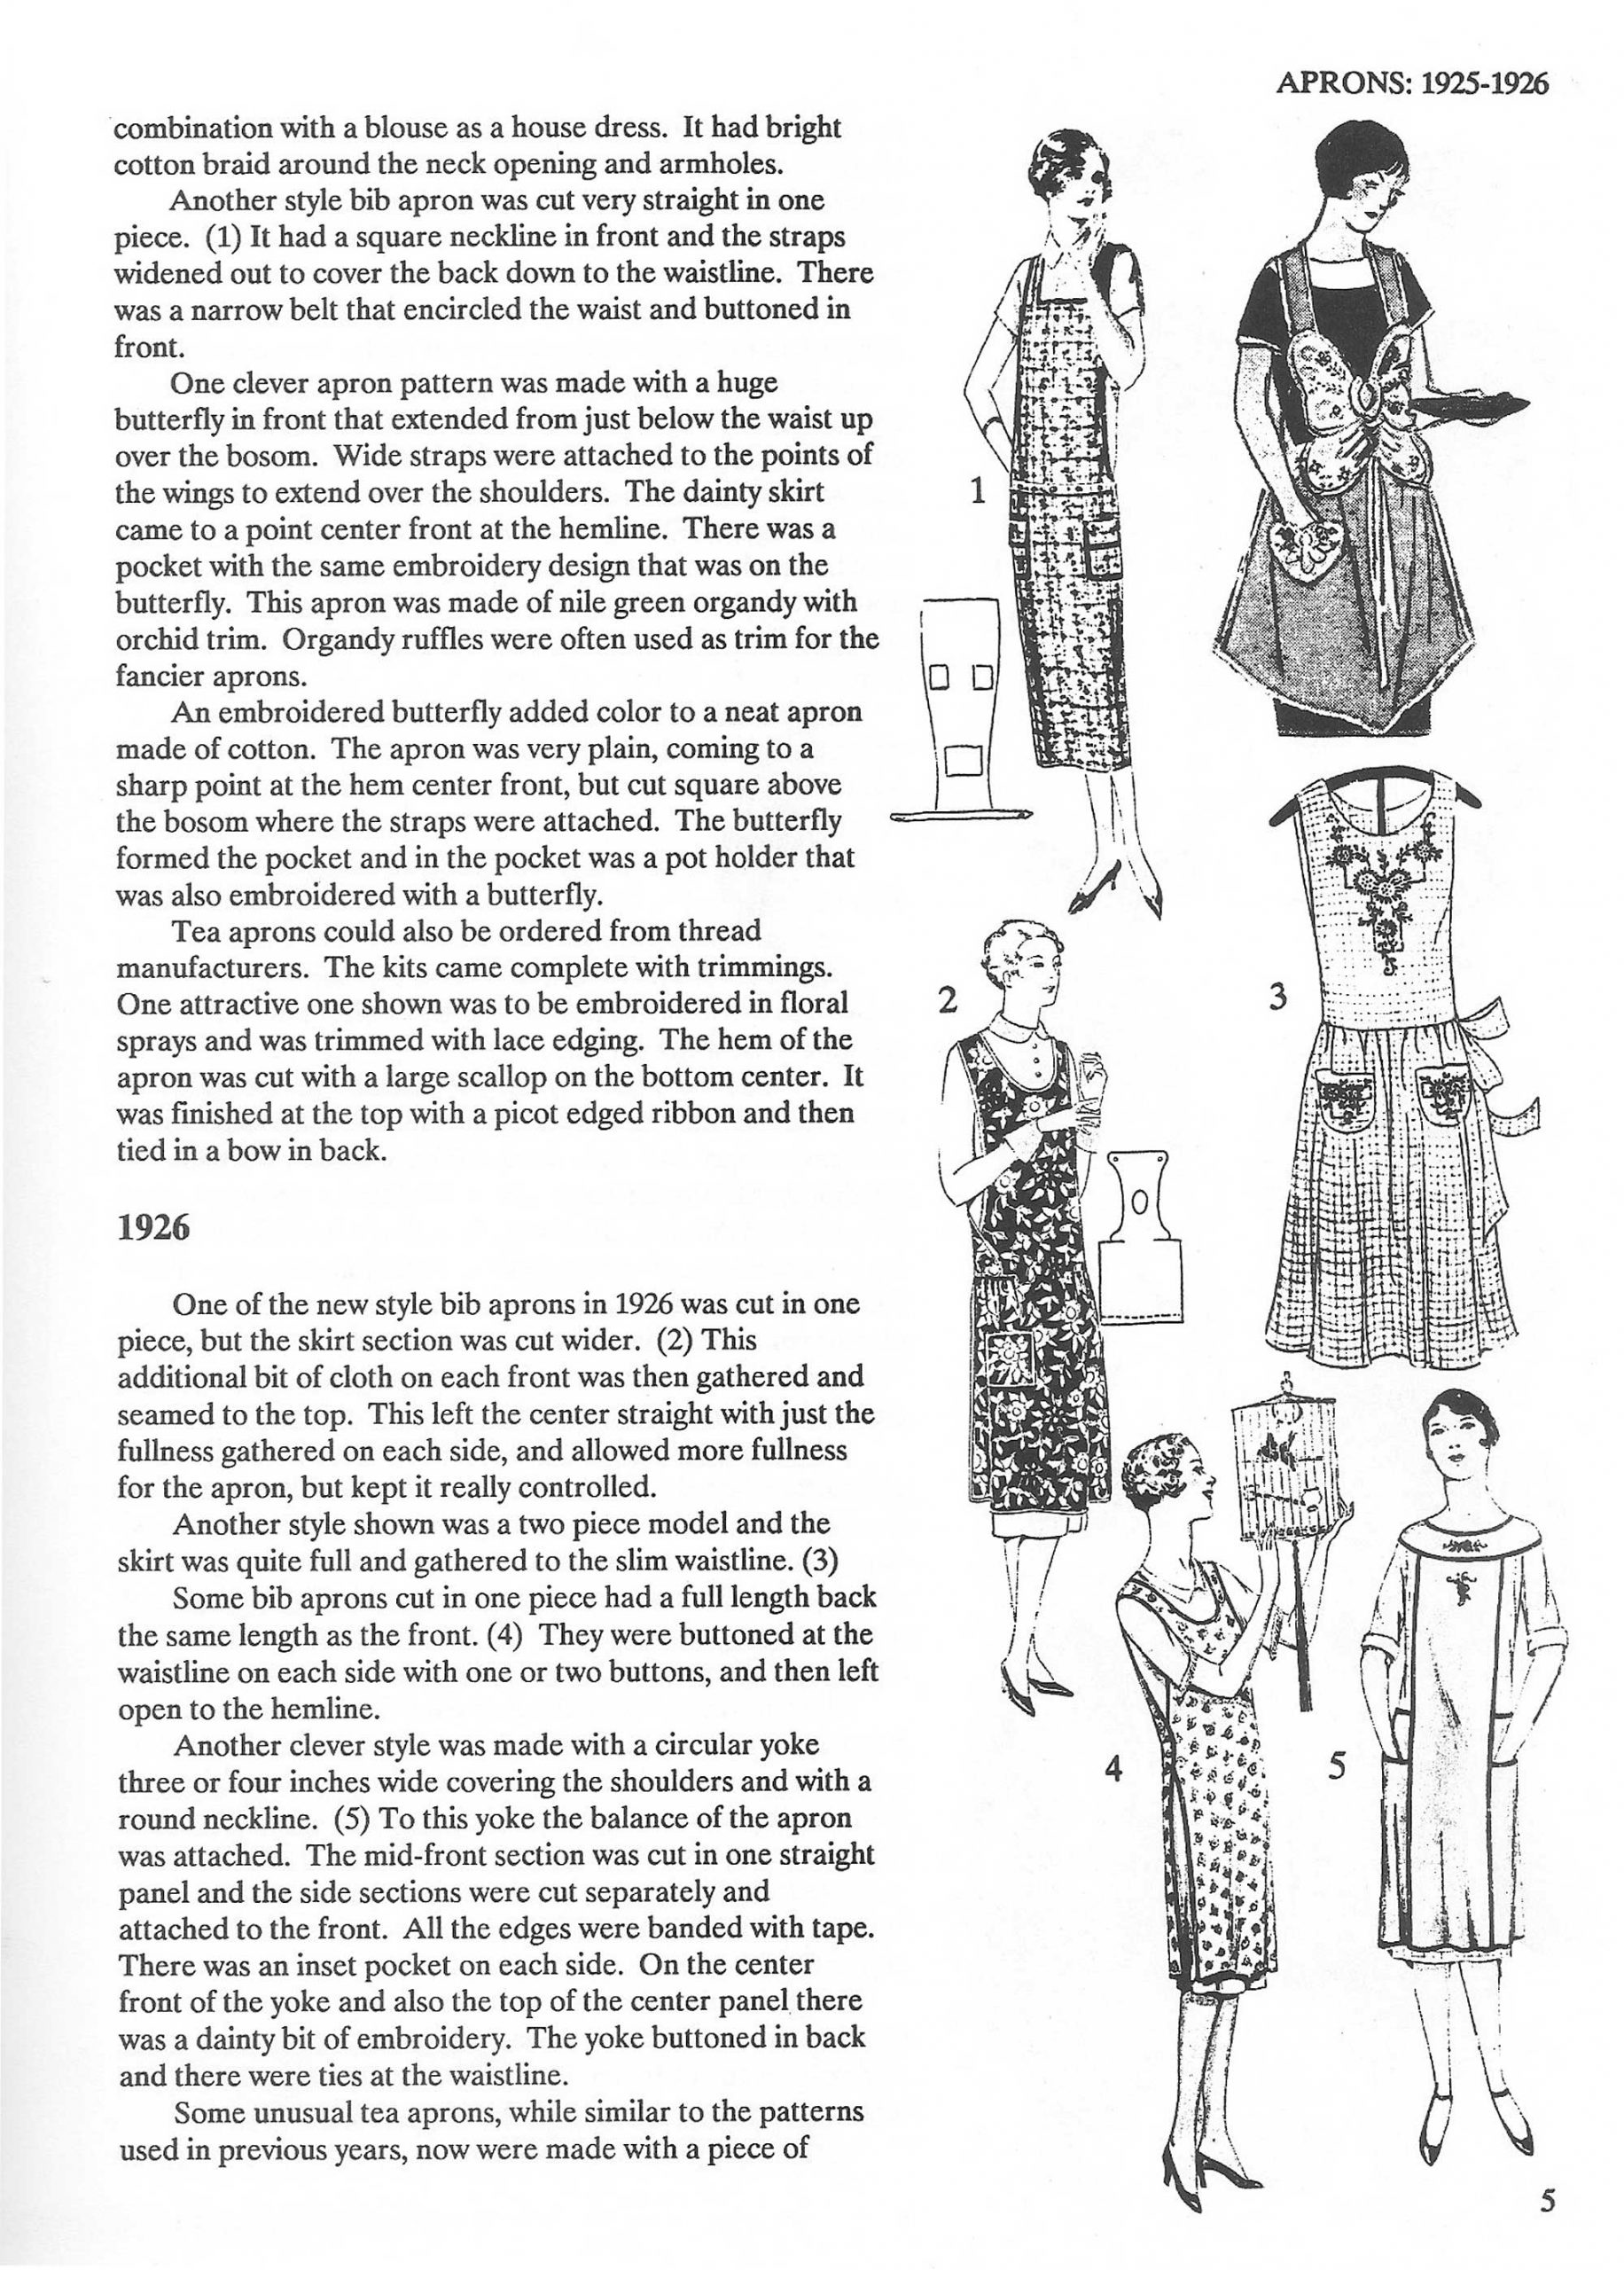 1920s Clothing: Fashions from 1920–1929